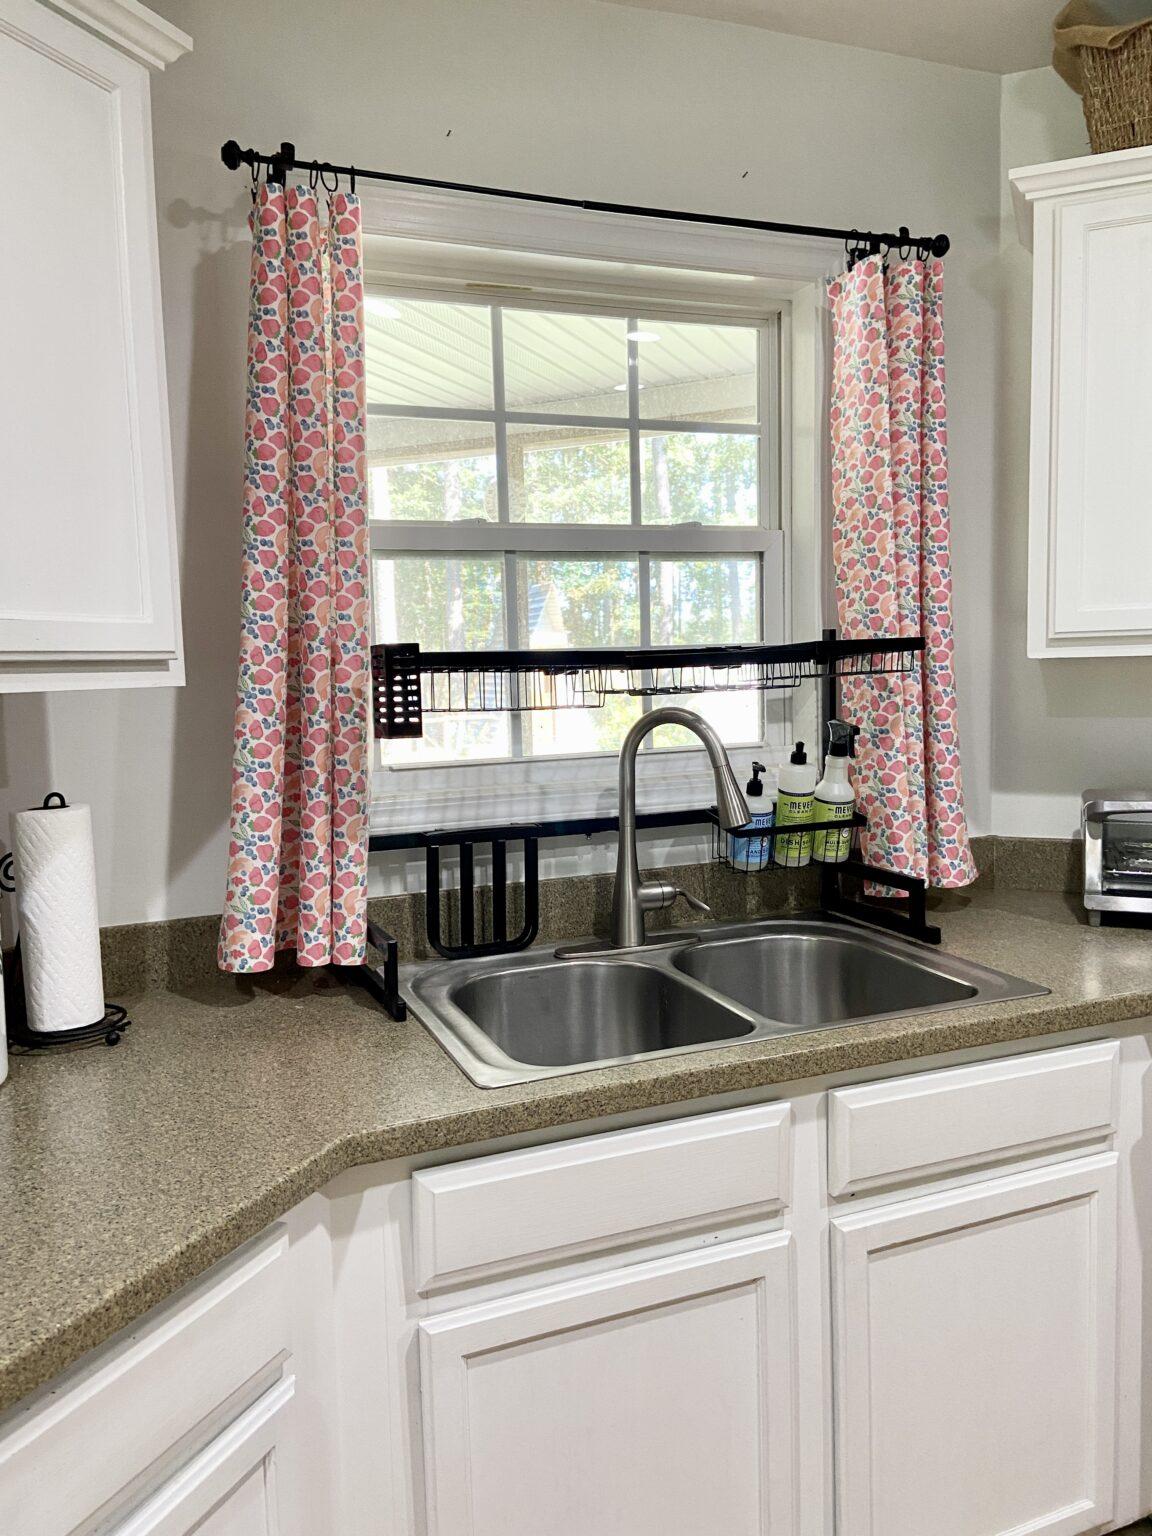 Floral Curtain For Kitchen